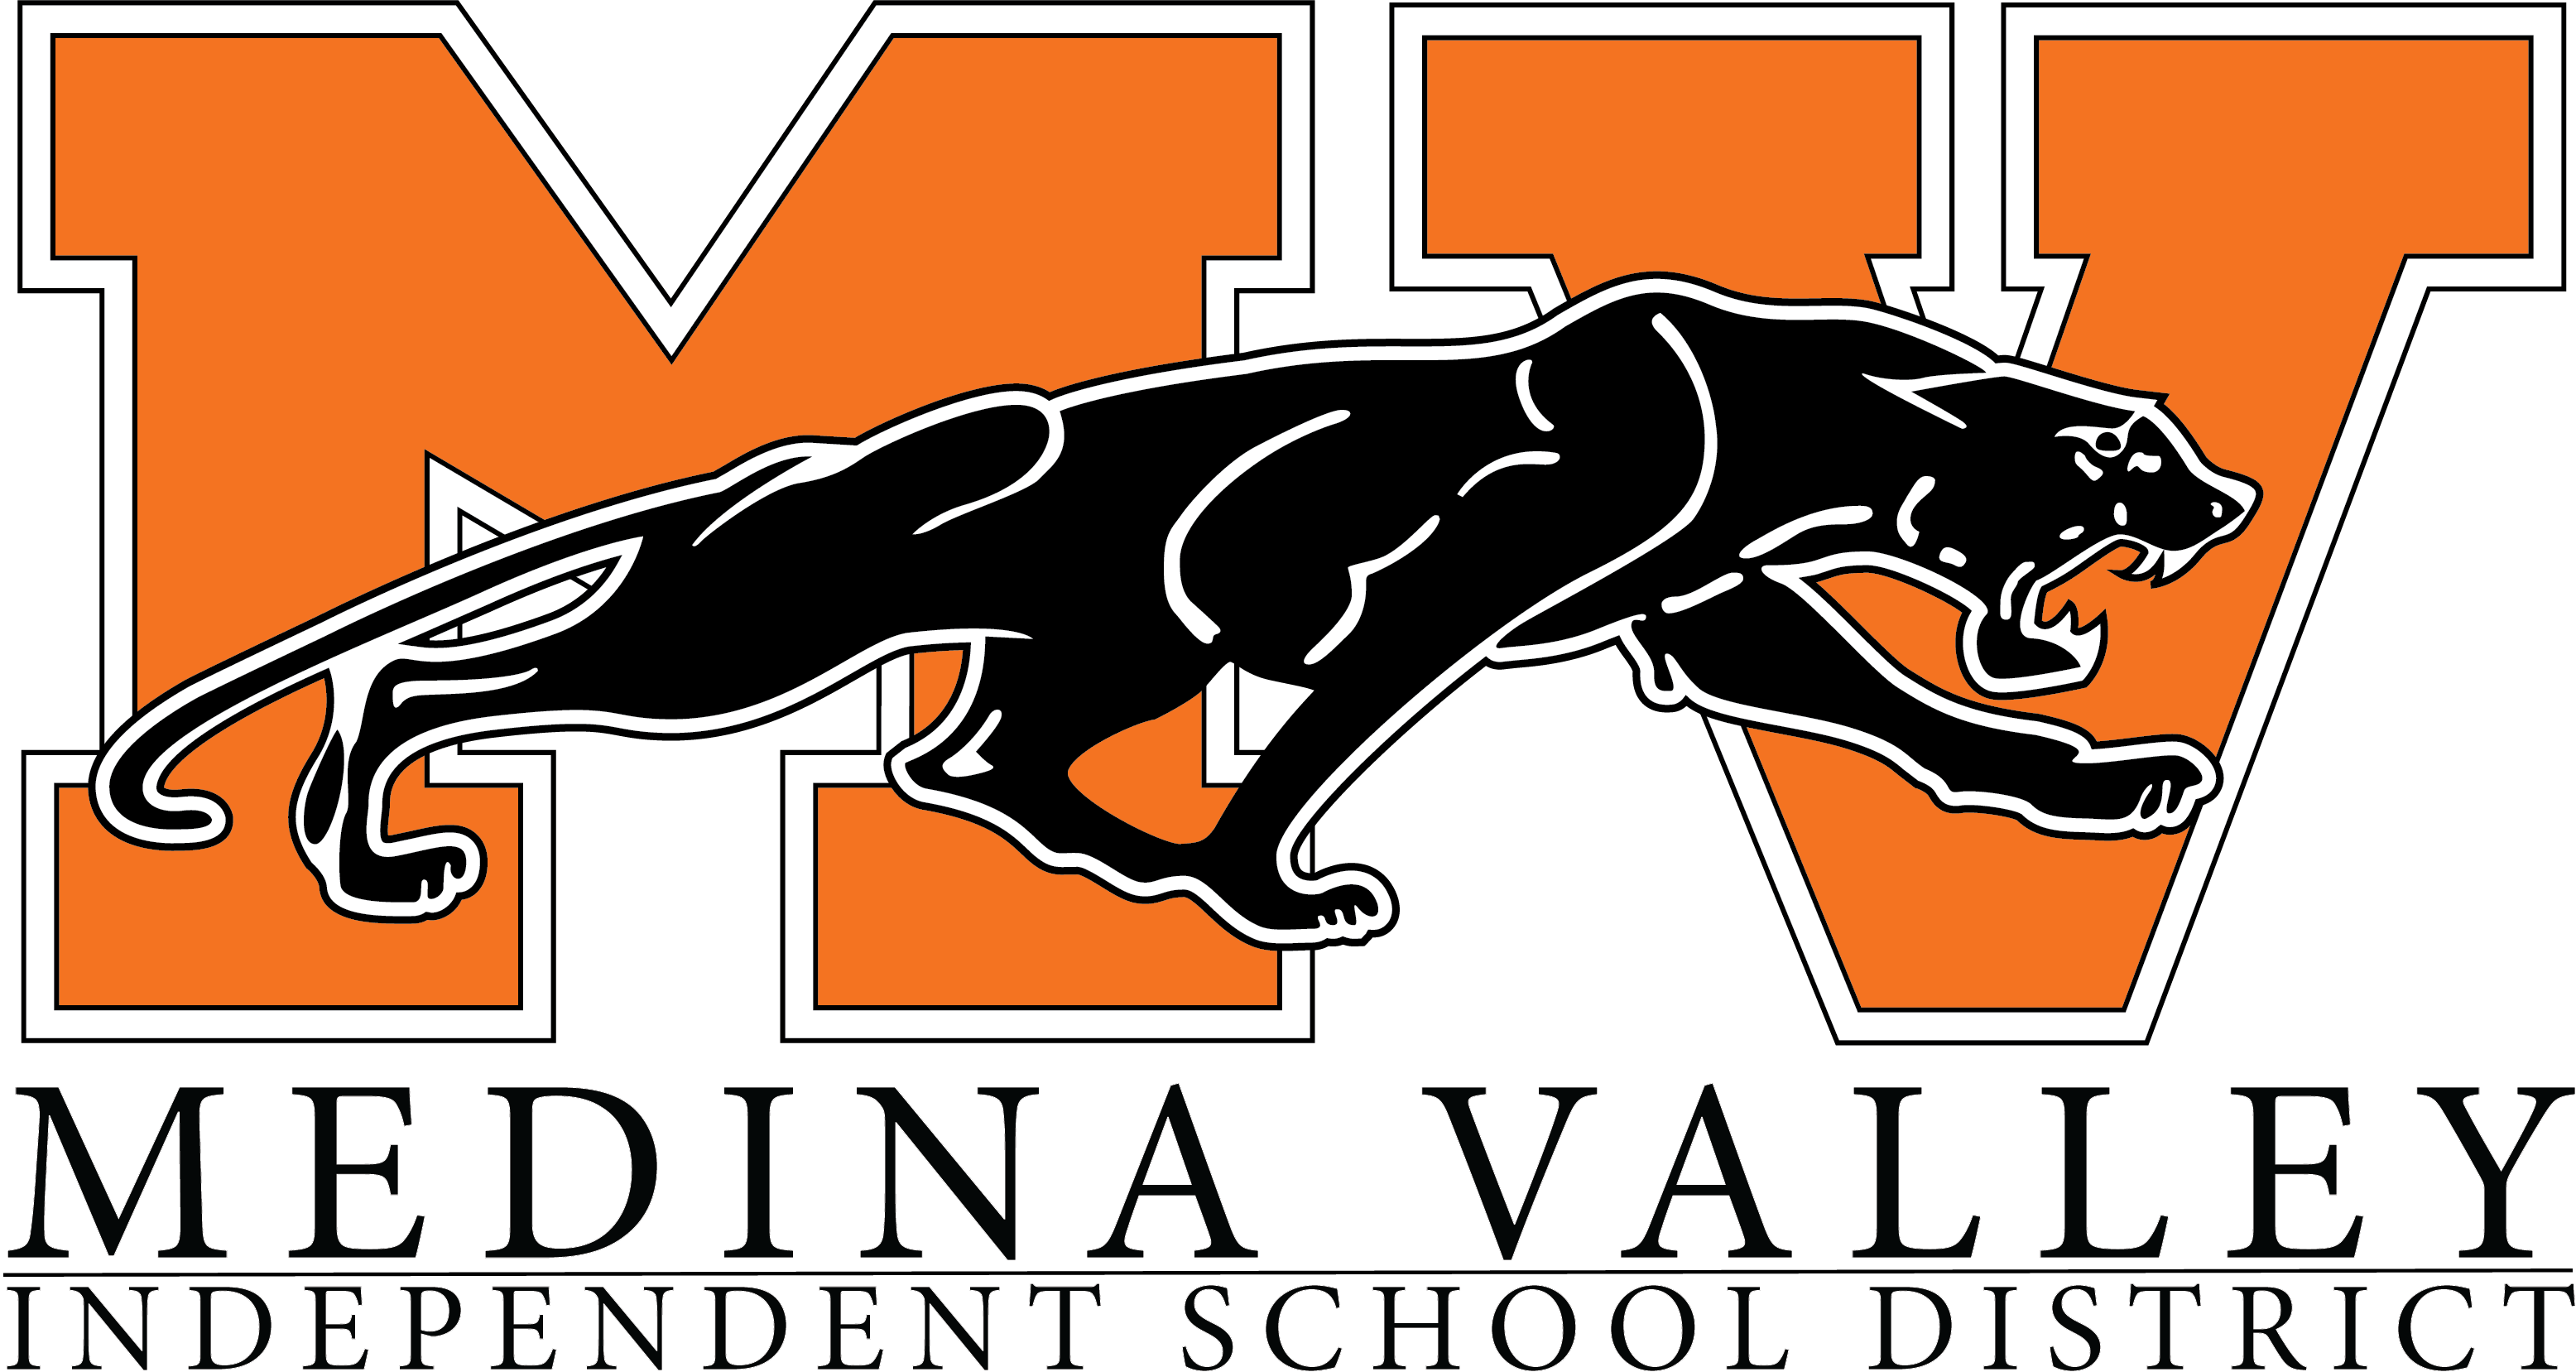 Panther clipart medina valley. Independent school district homepage